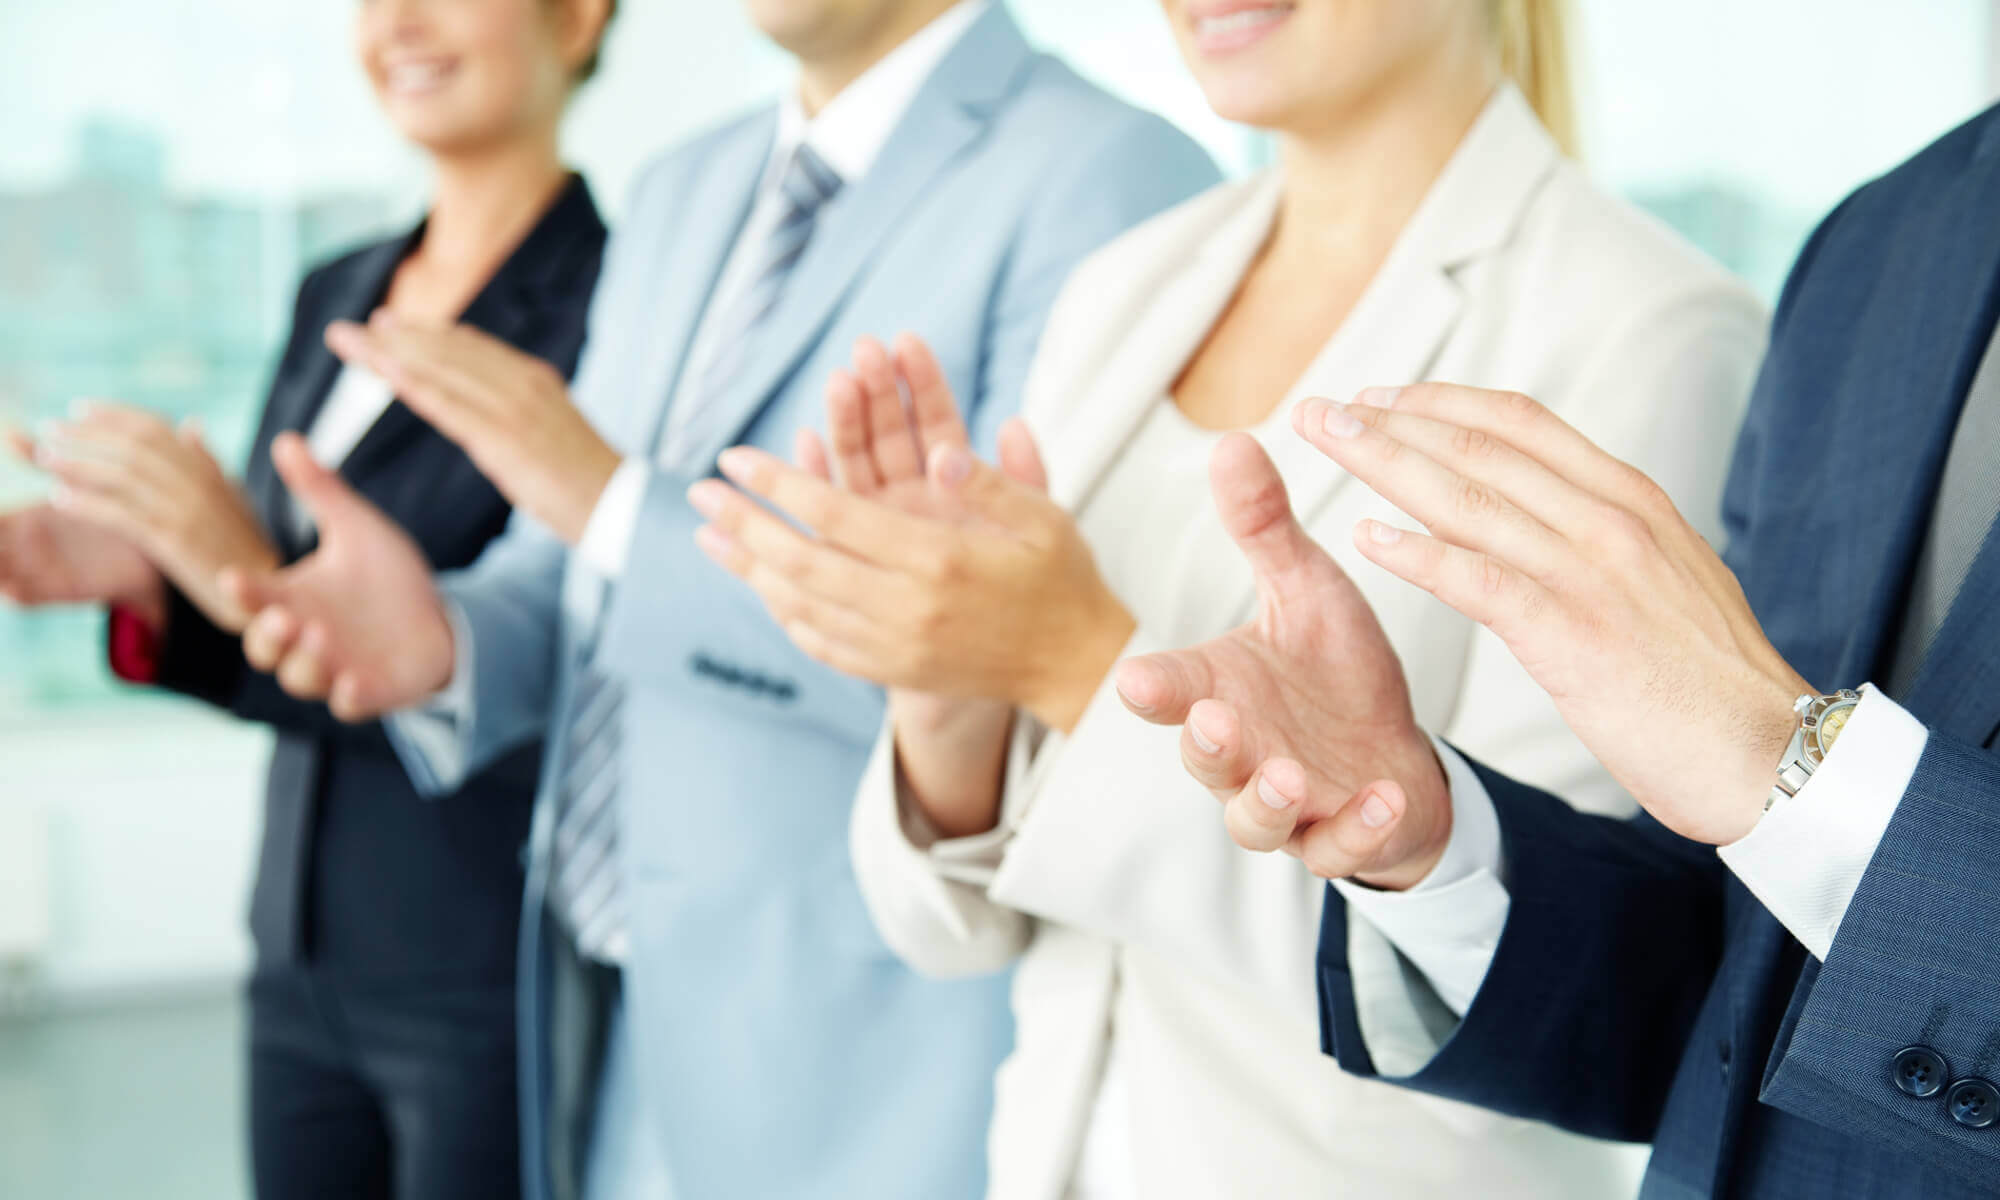 Close up of 4 business people's hands clapping